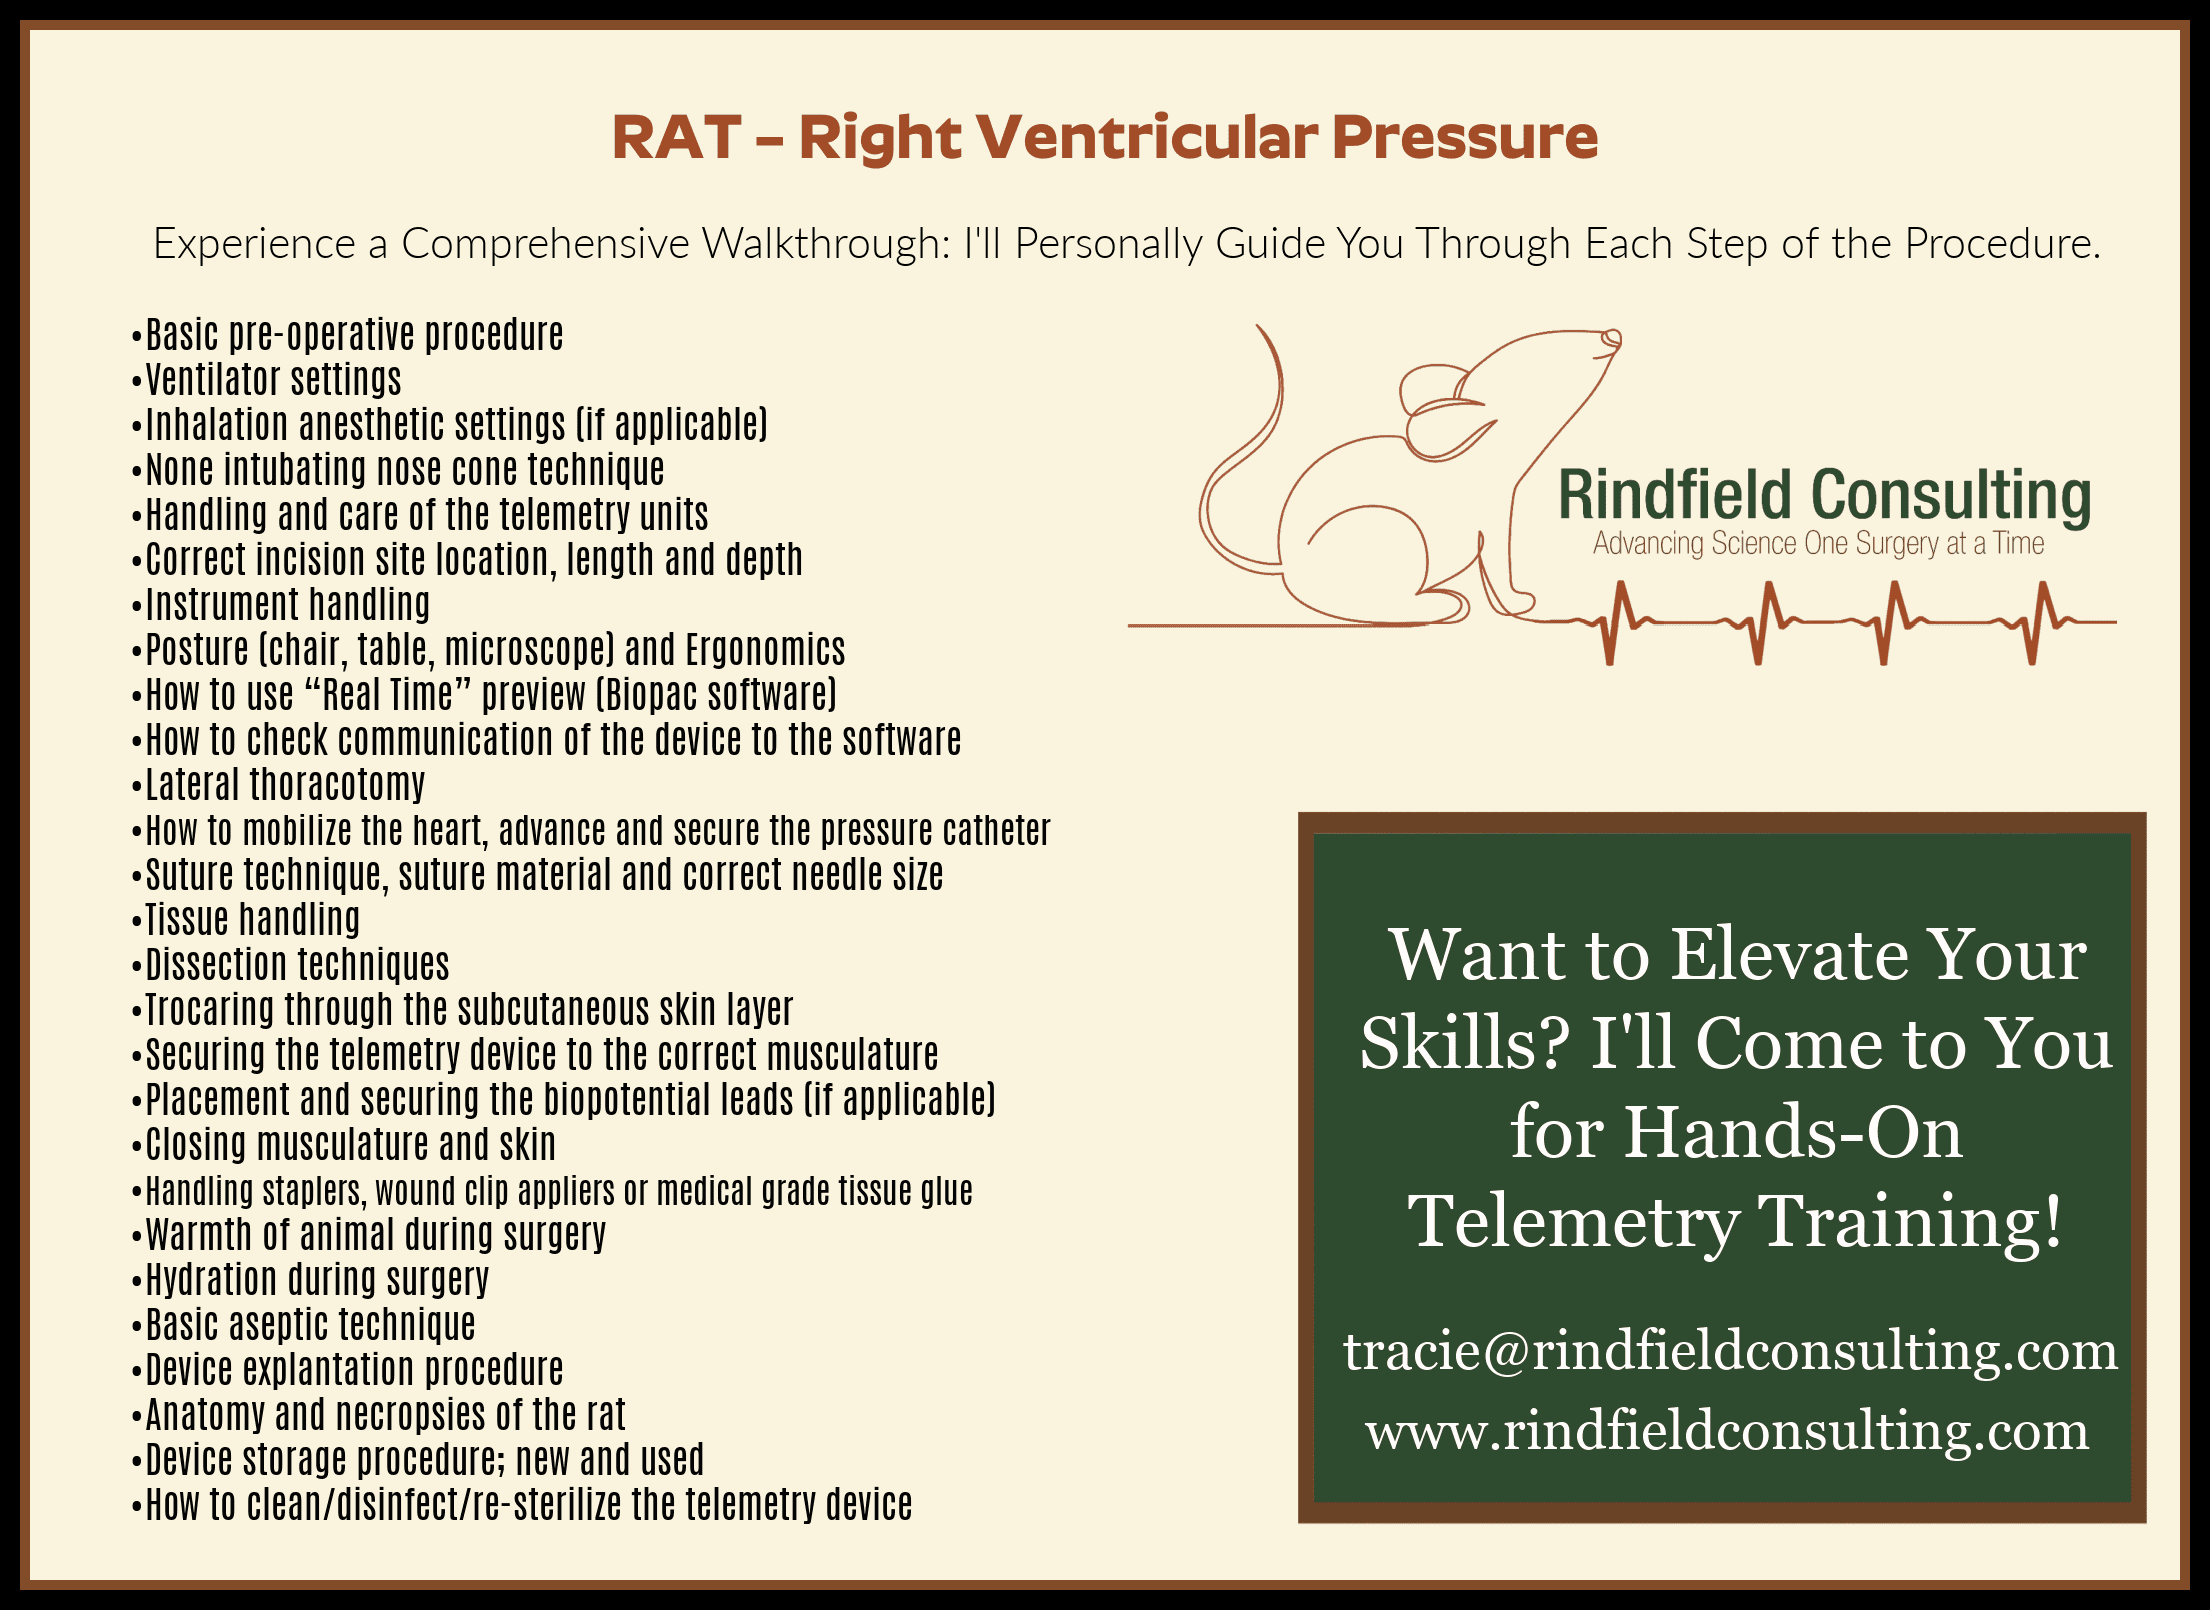 A brochure for the rat-right ventricular pressure.